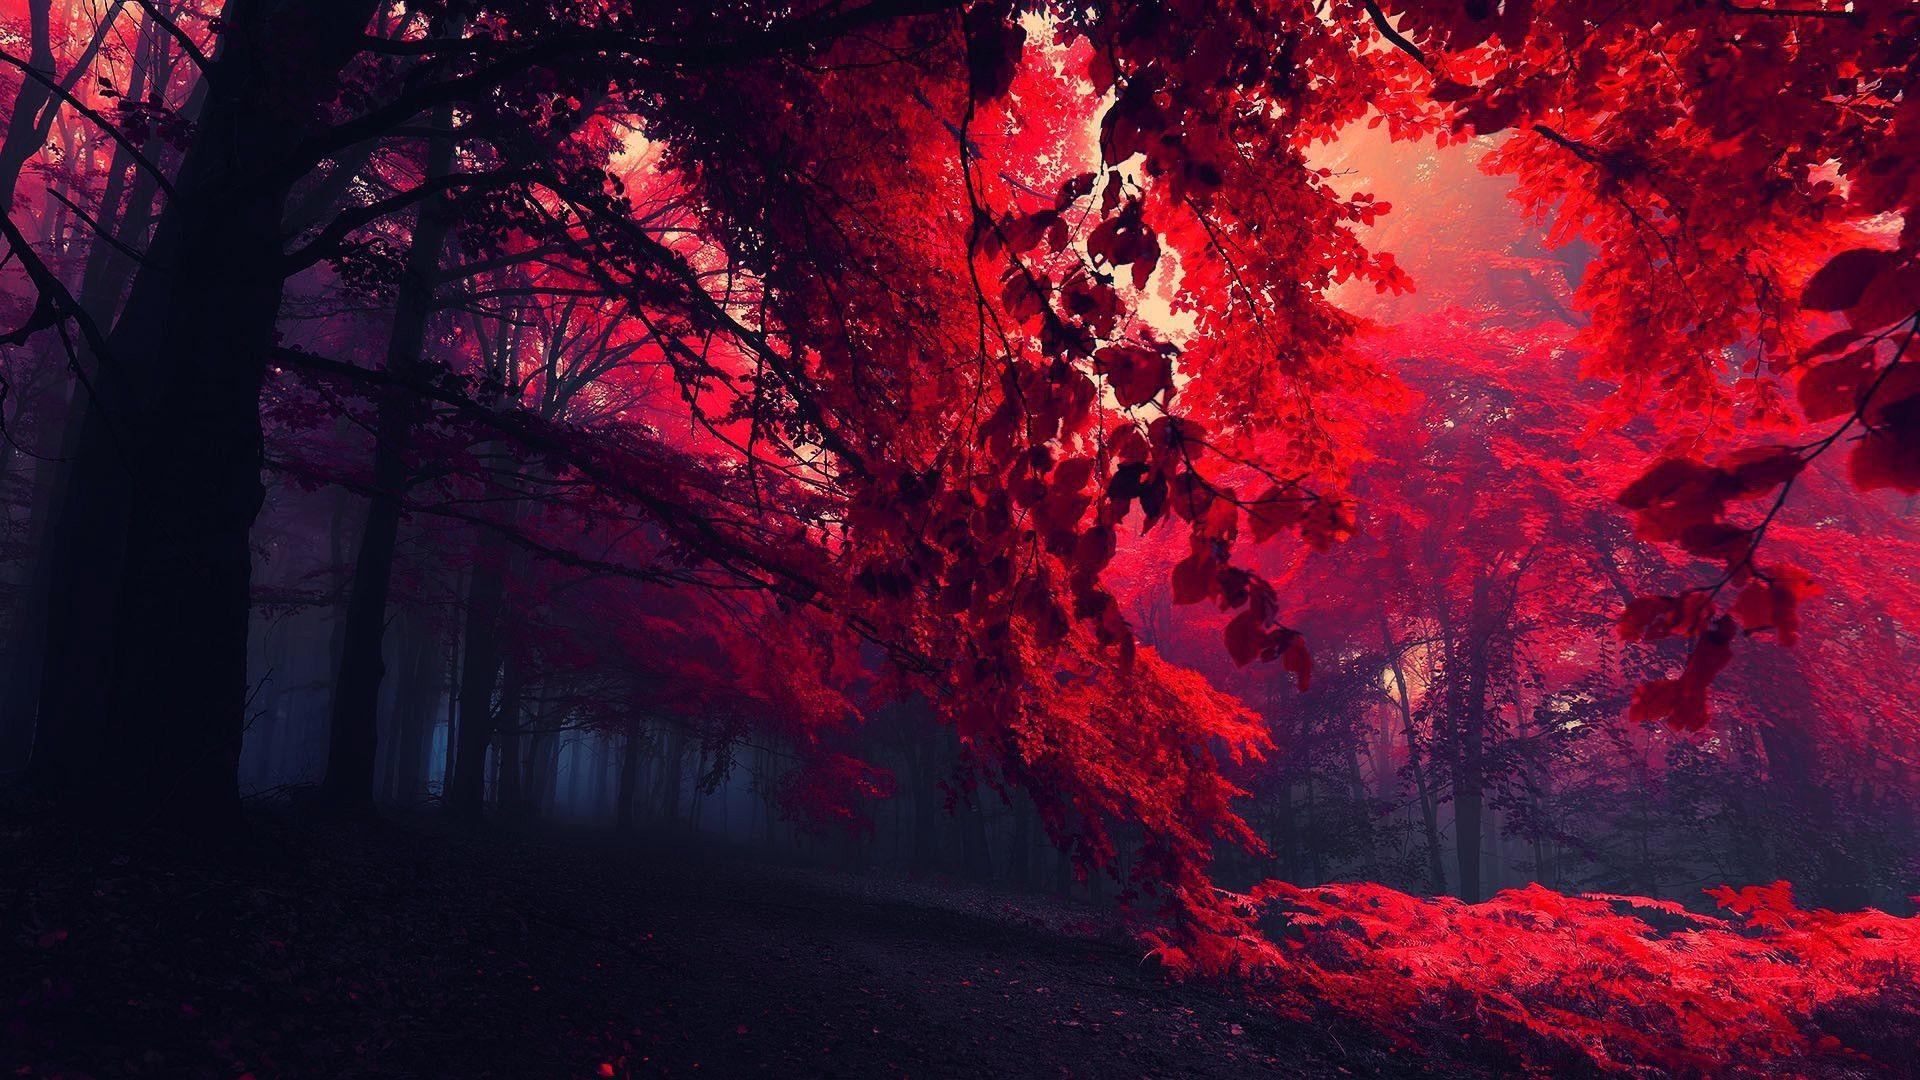 Red Landscape Wallpapers - Top Free Red Landscape Backgrounds ...